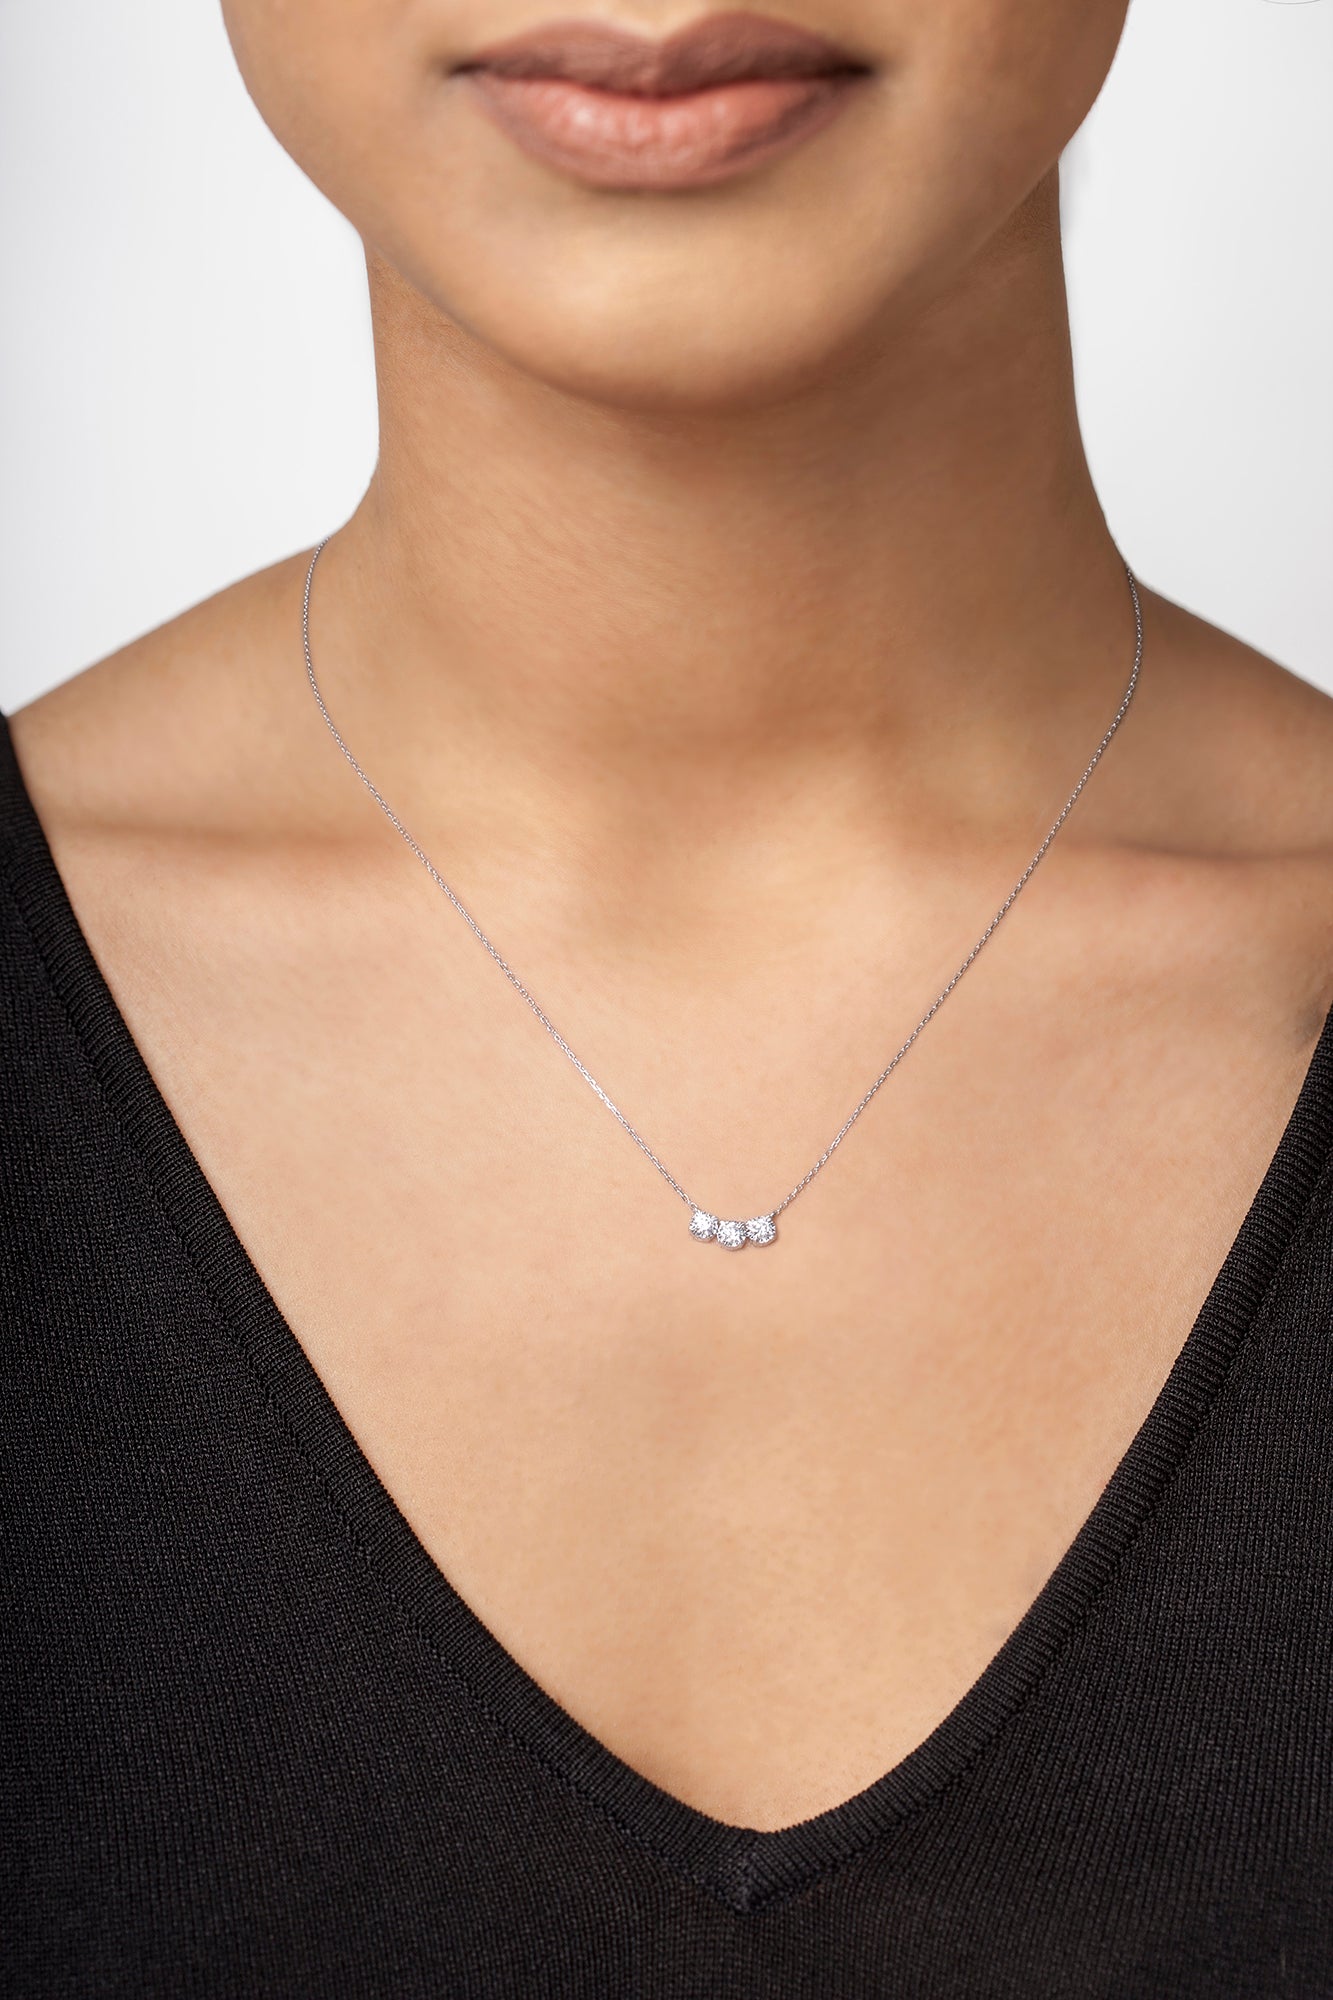 Miracle 3 stone Necklace- 50% OFF!